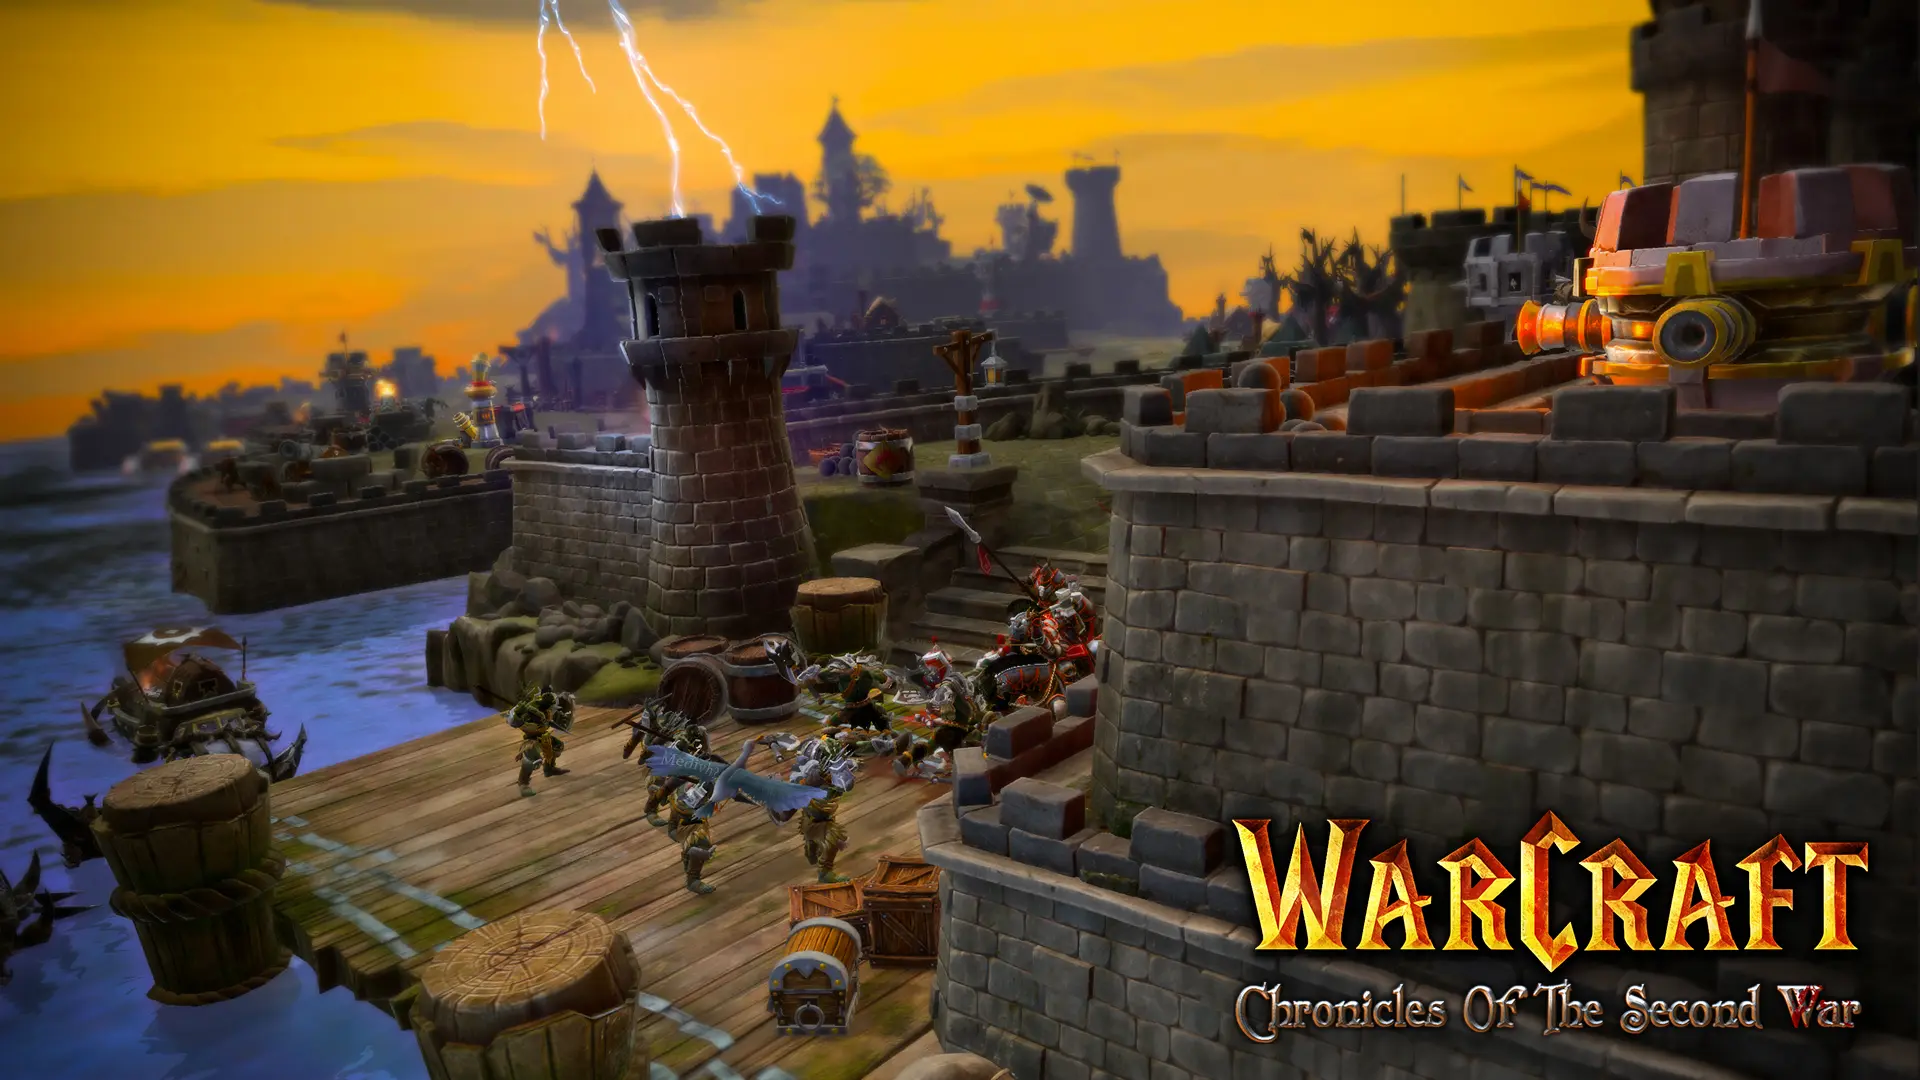 Warcraft: Chronicles of the Second War